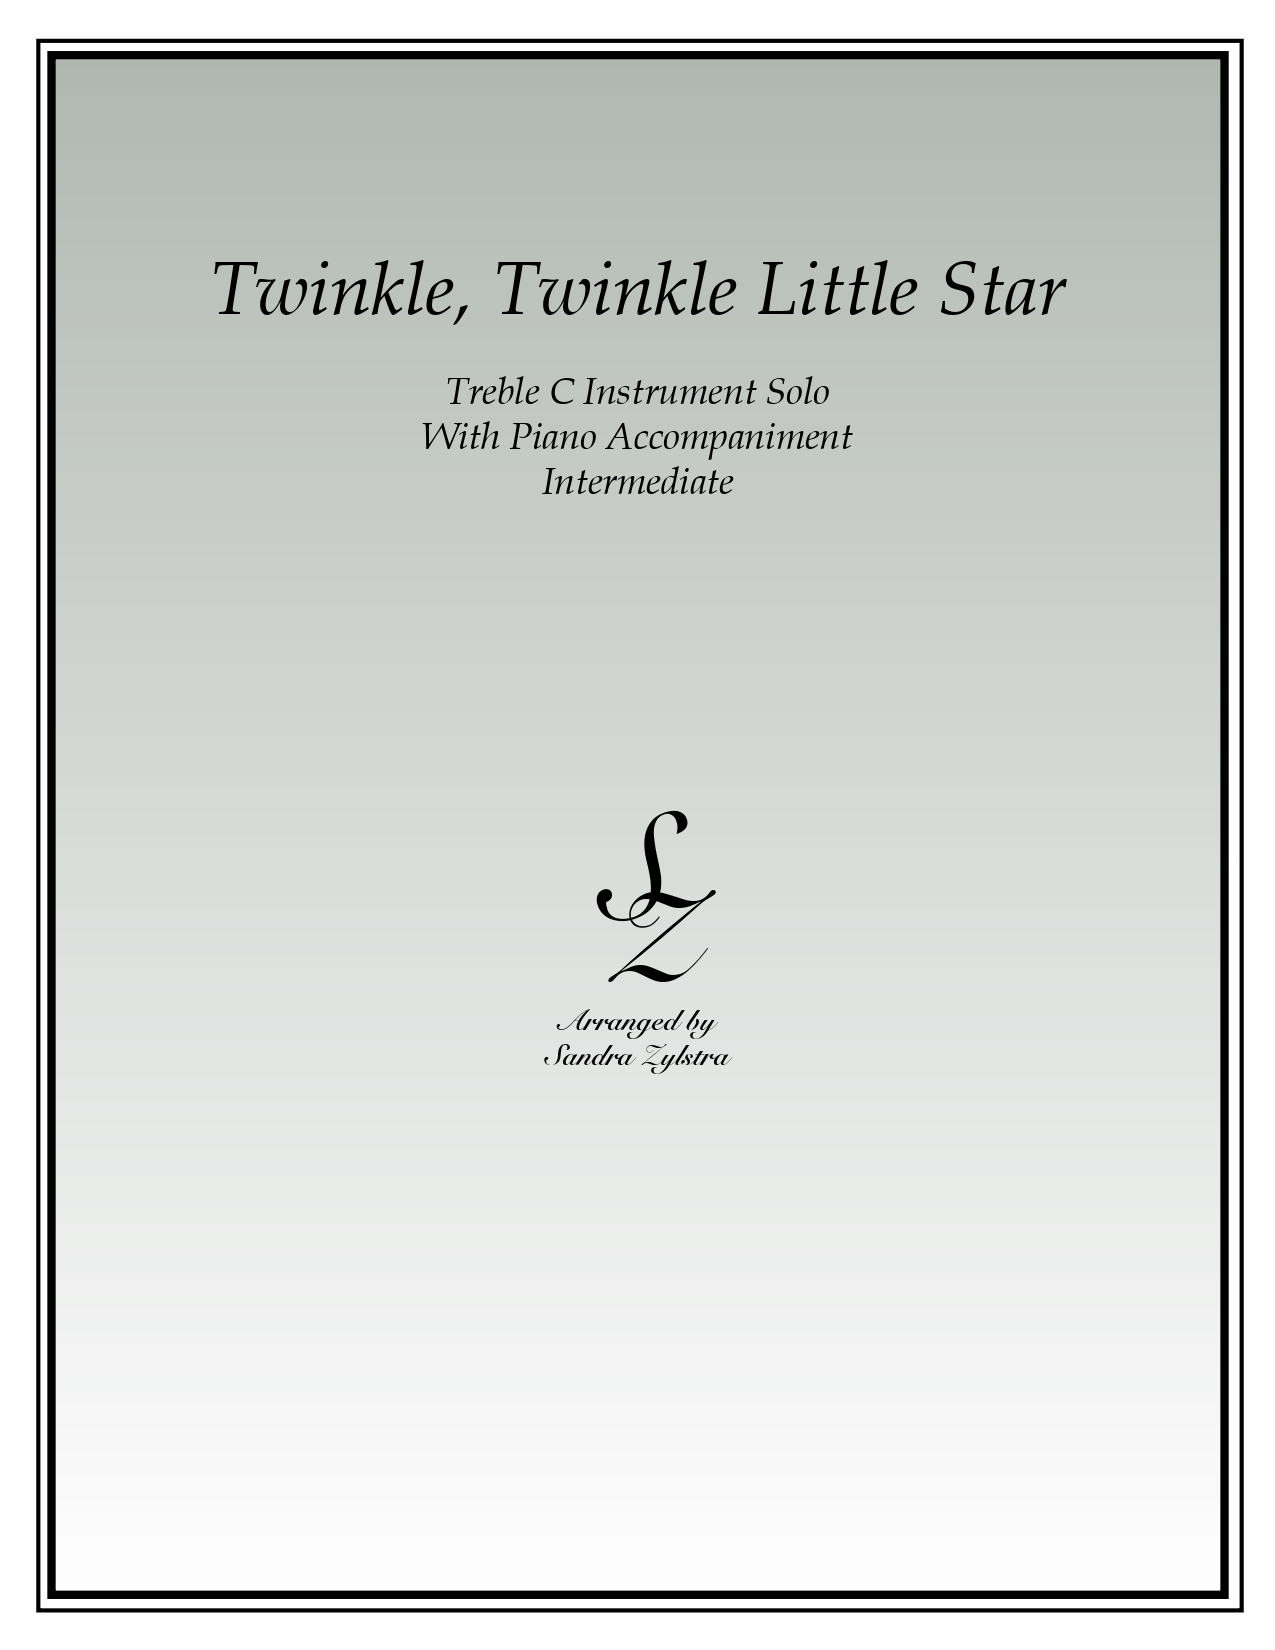 Twinkle Twinkle Little Star treble C instrument solo part cover page 00011